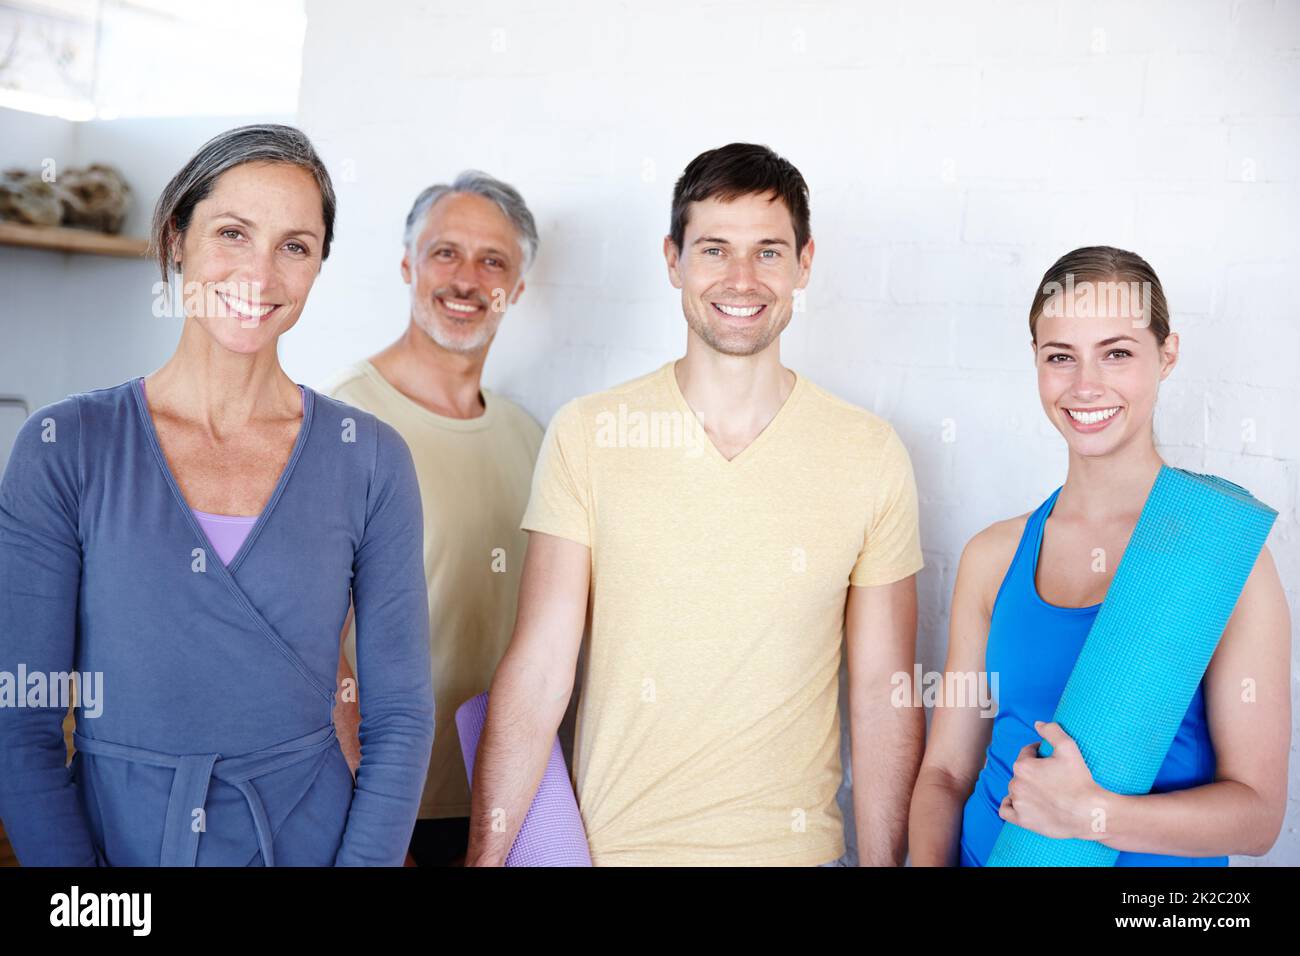 That was good. A group of people tstanding together after gym class. Stock Photo